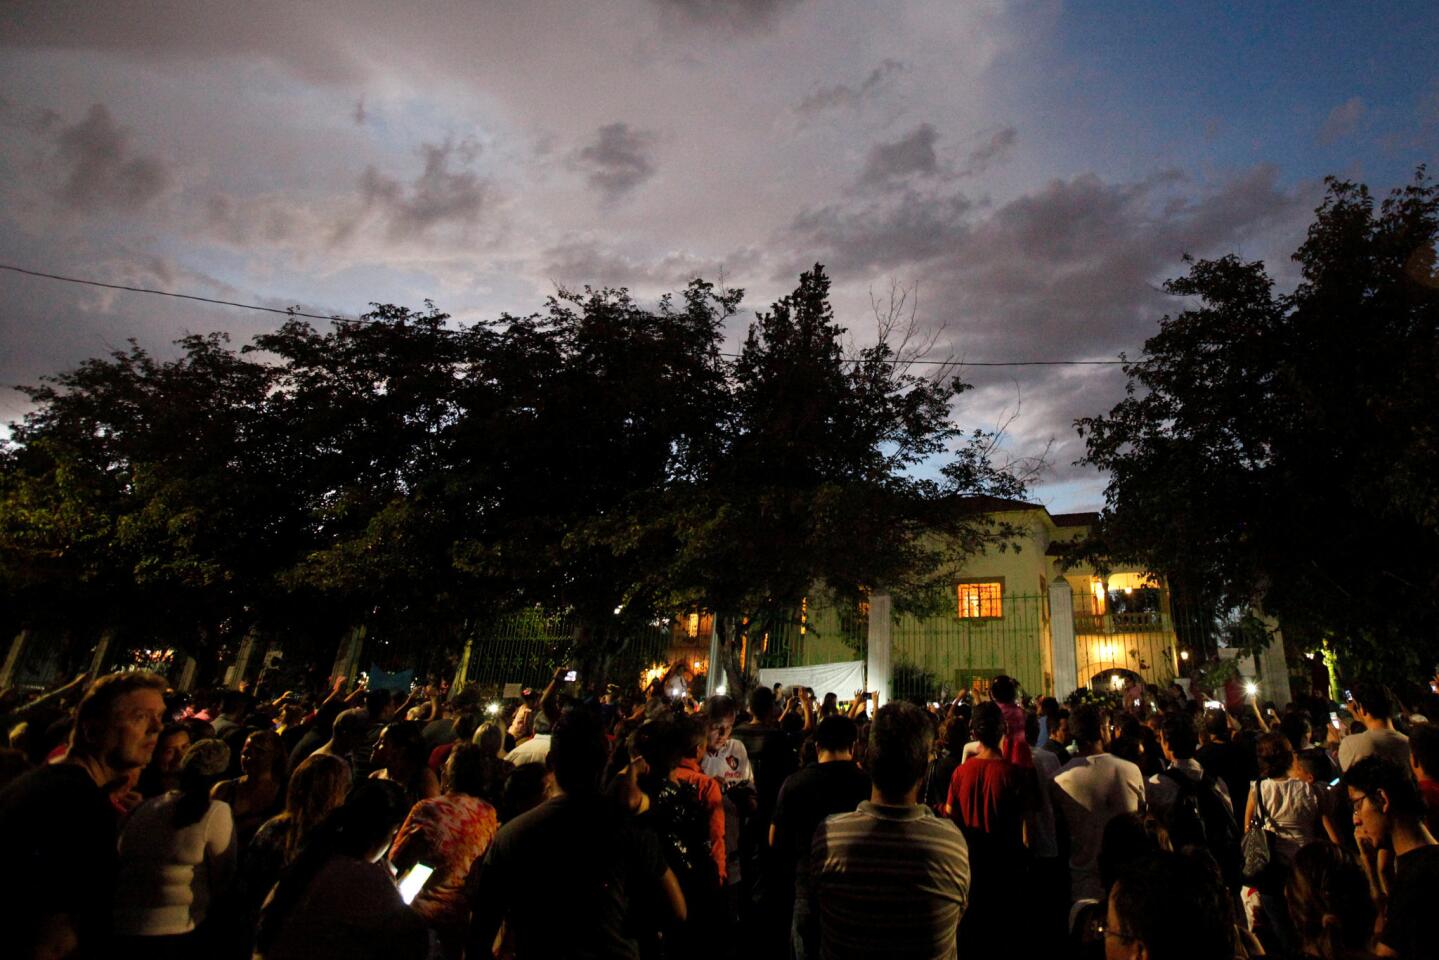 Fans gather outside the house of iconic Mexican singer and songwriter Juan Gabriel after his death, in Ciudad Juarez